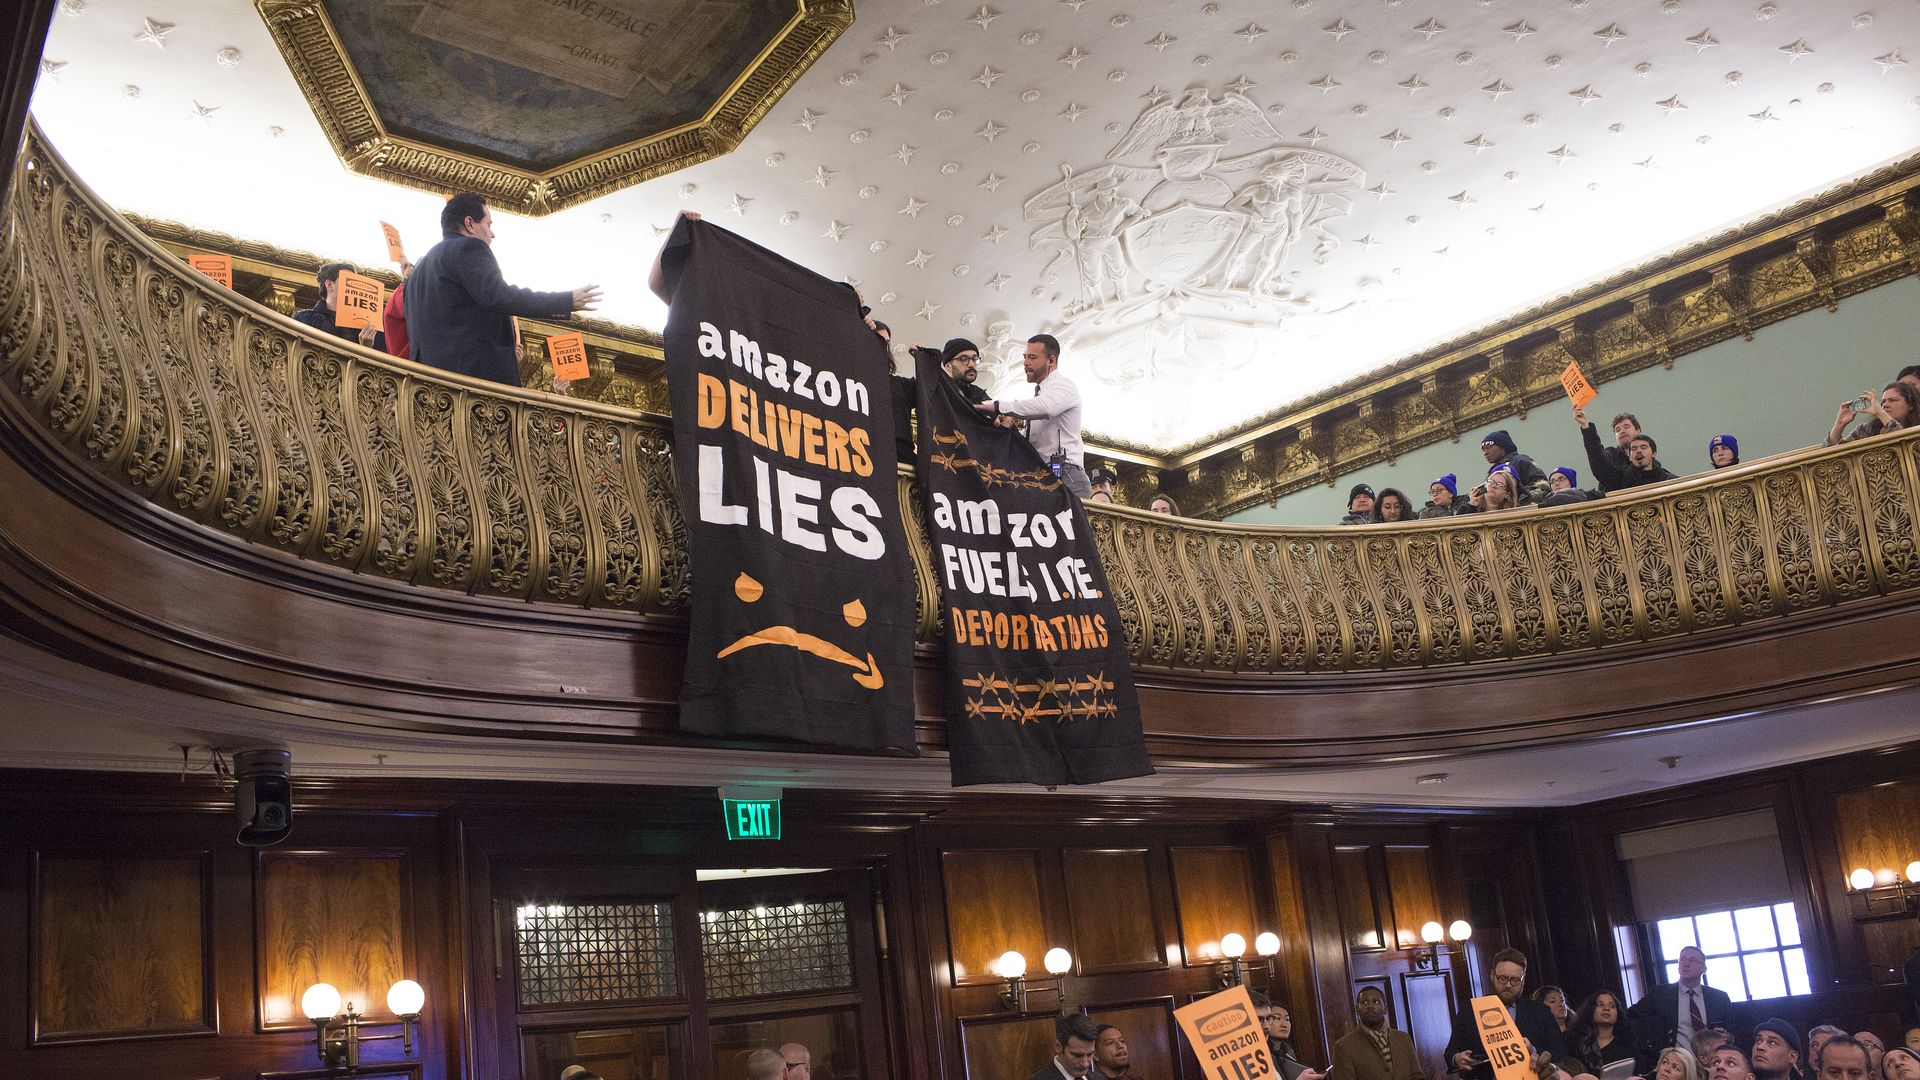 Photo of protestors at NYC council meeting on Amazon's deal to have HQ2 in Long Island City.